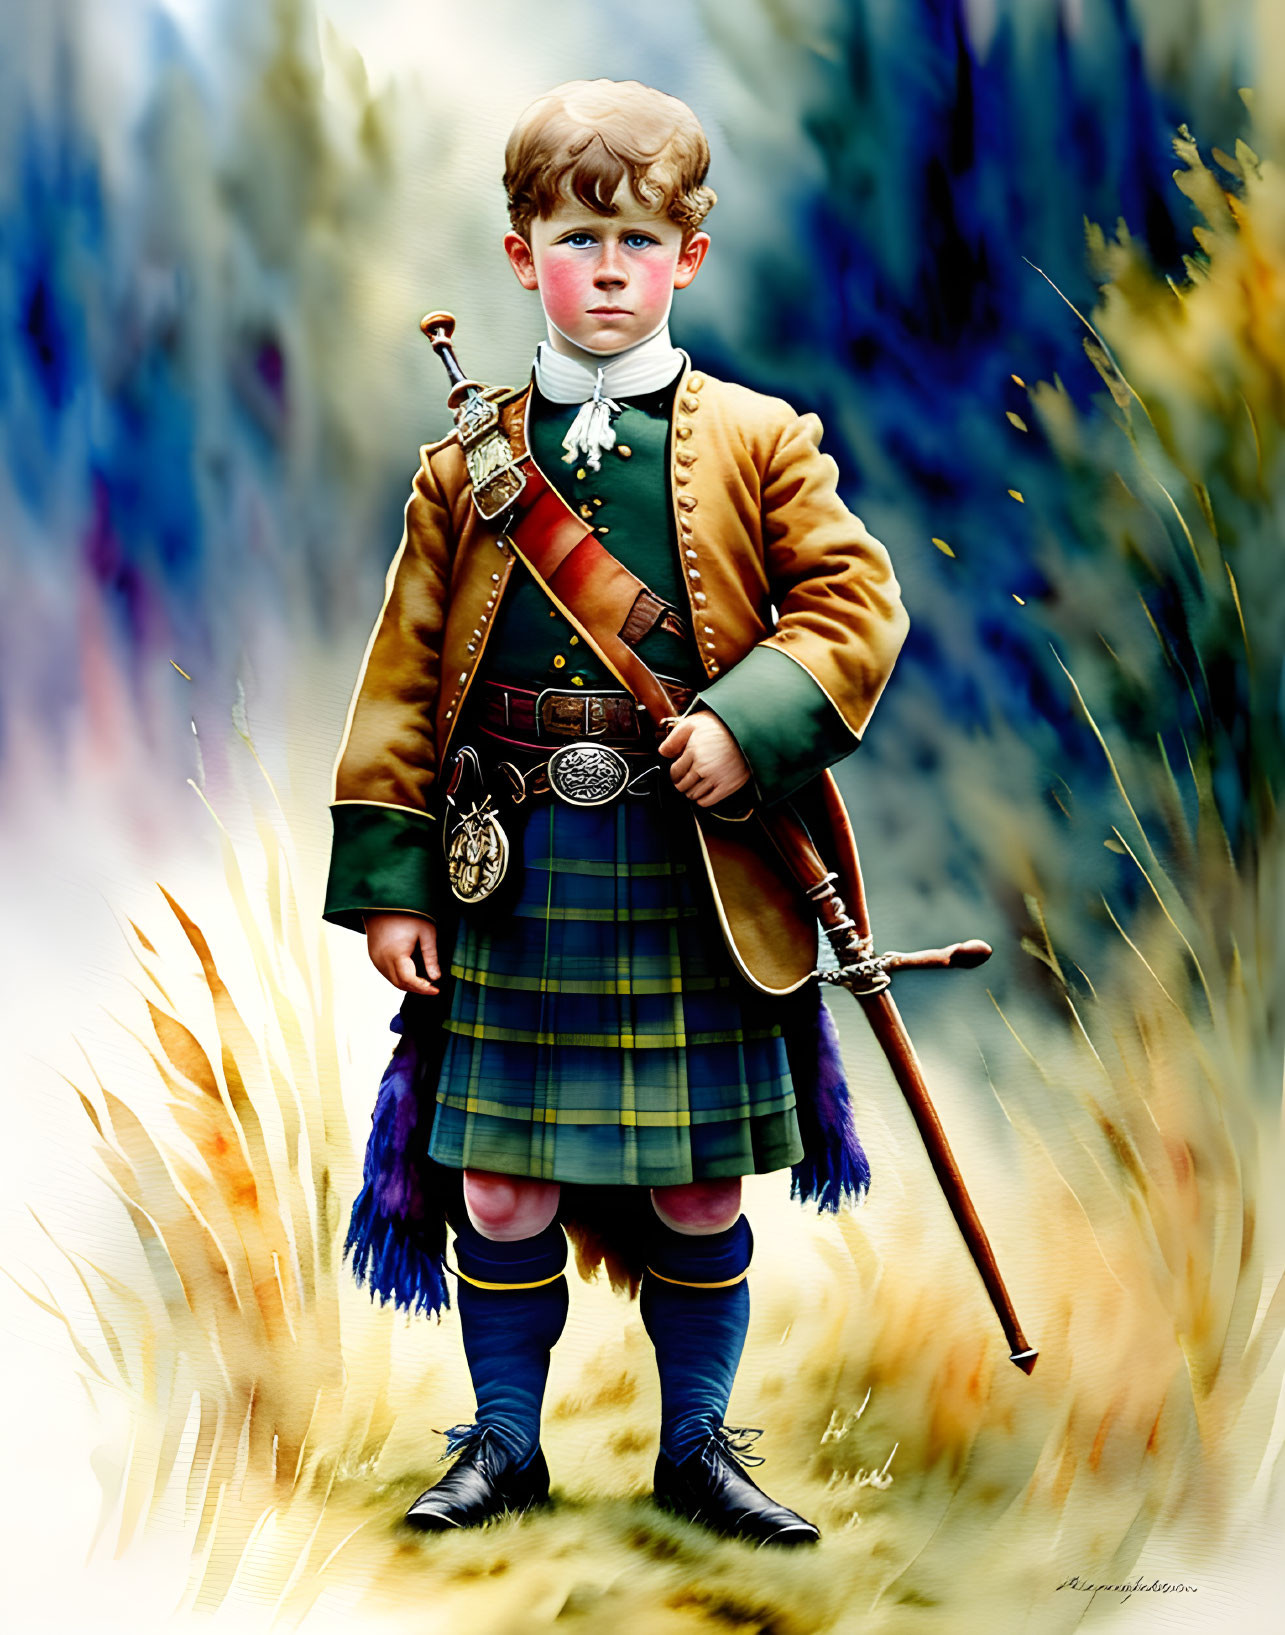 Young boy in traditional Scottish attire with kilt, sporran, and walking stick in grassy field